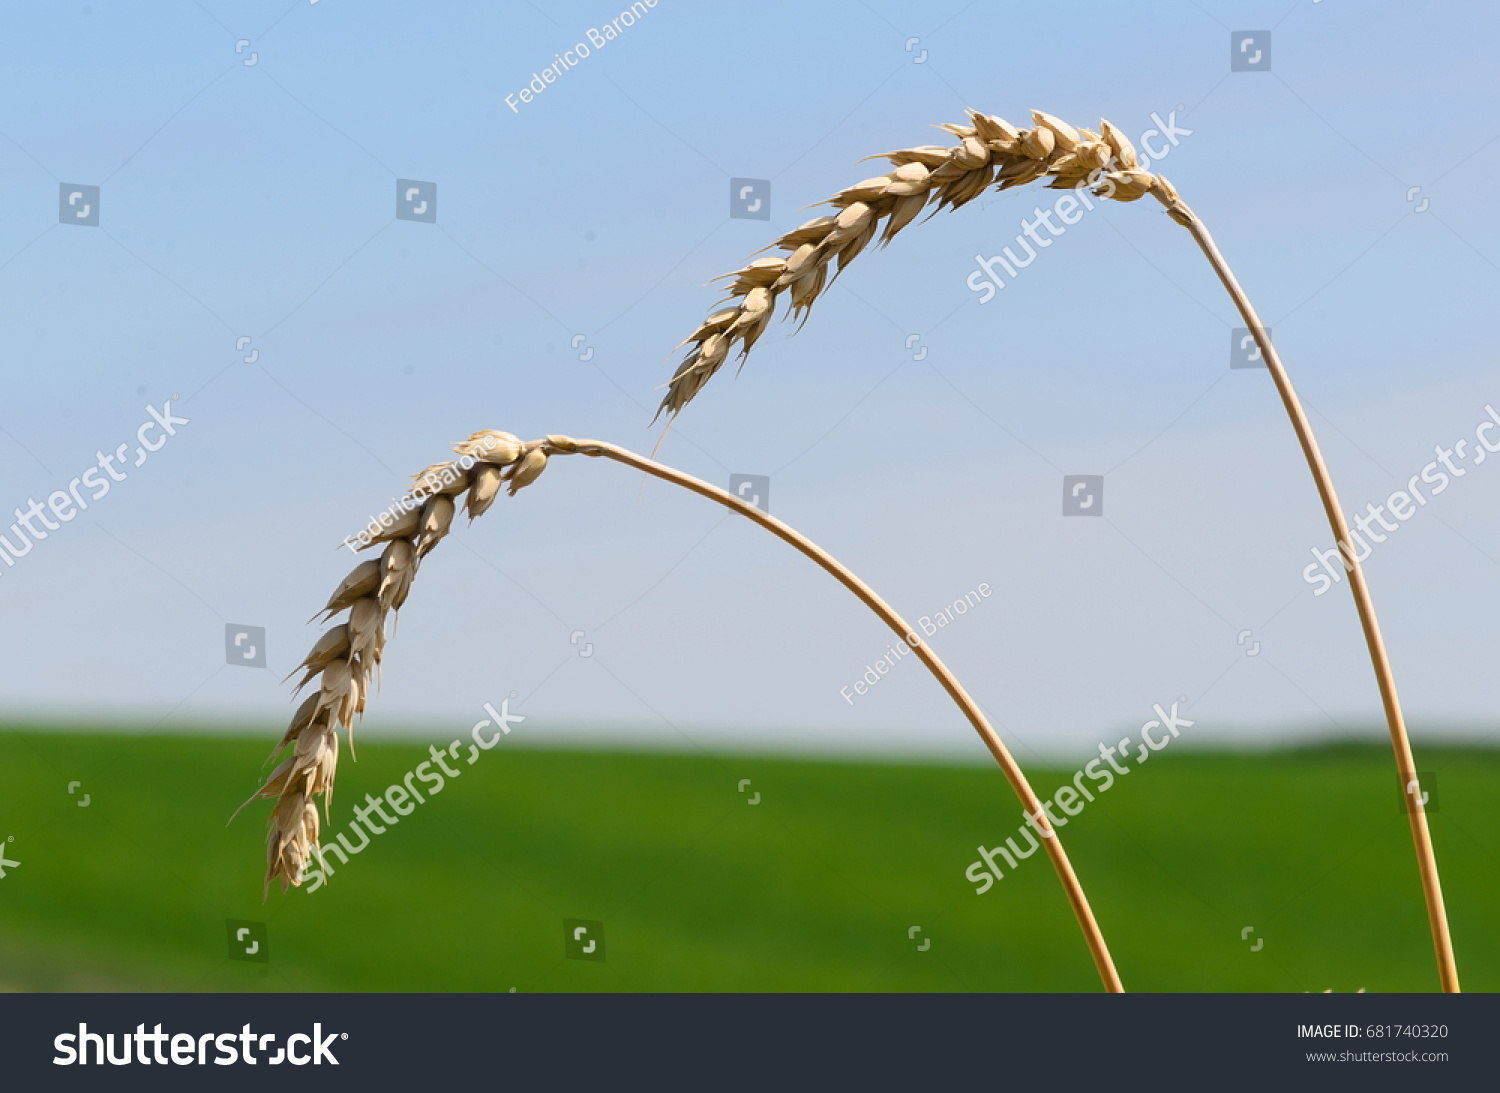 stock-photo-wheat-ears-leaning-under-the